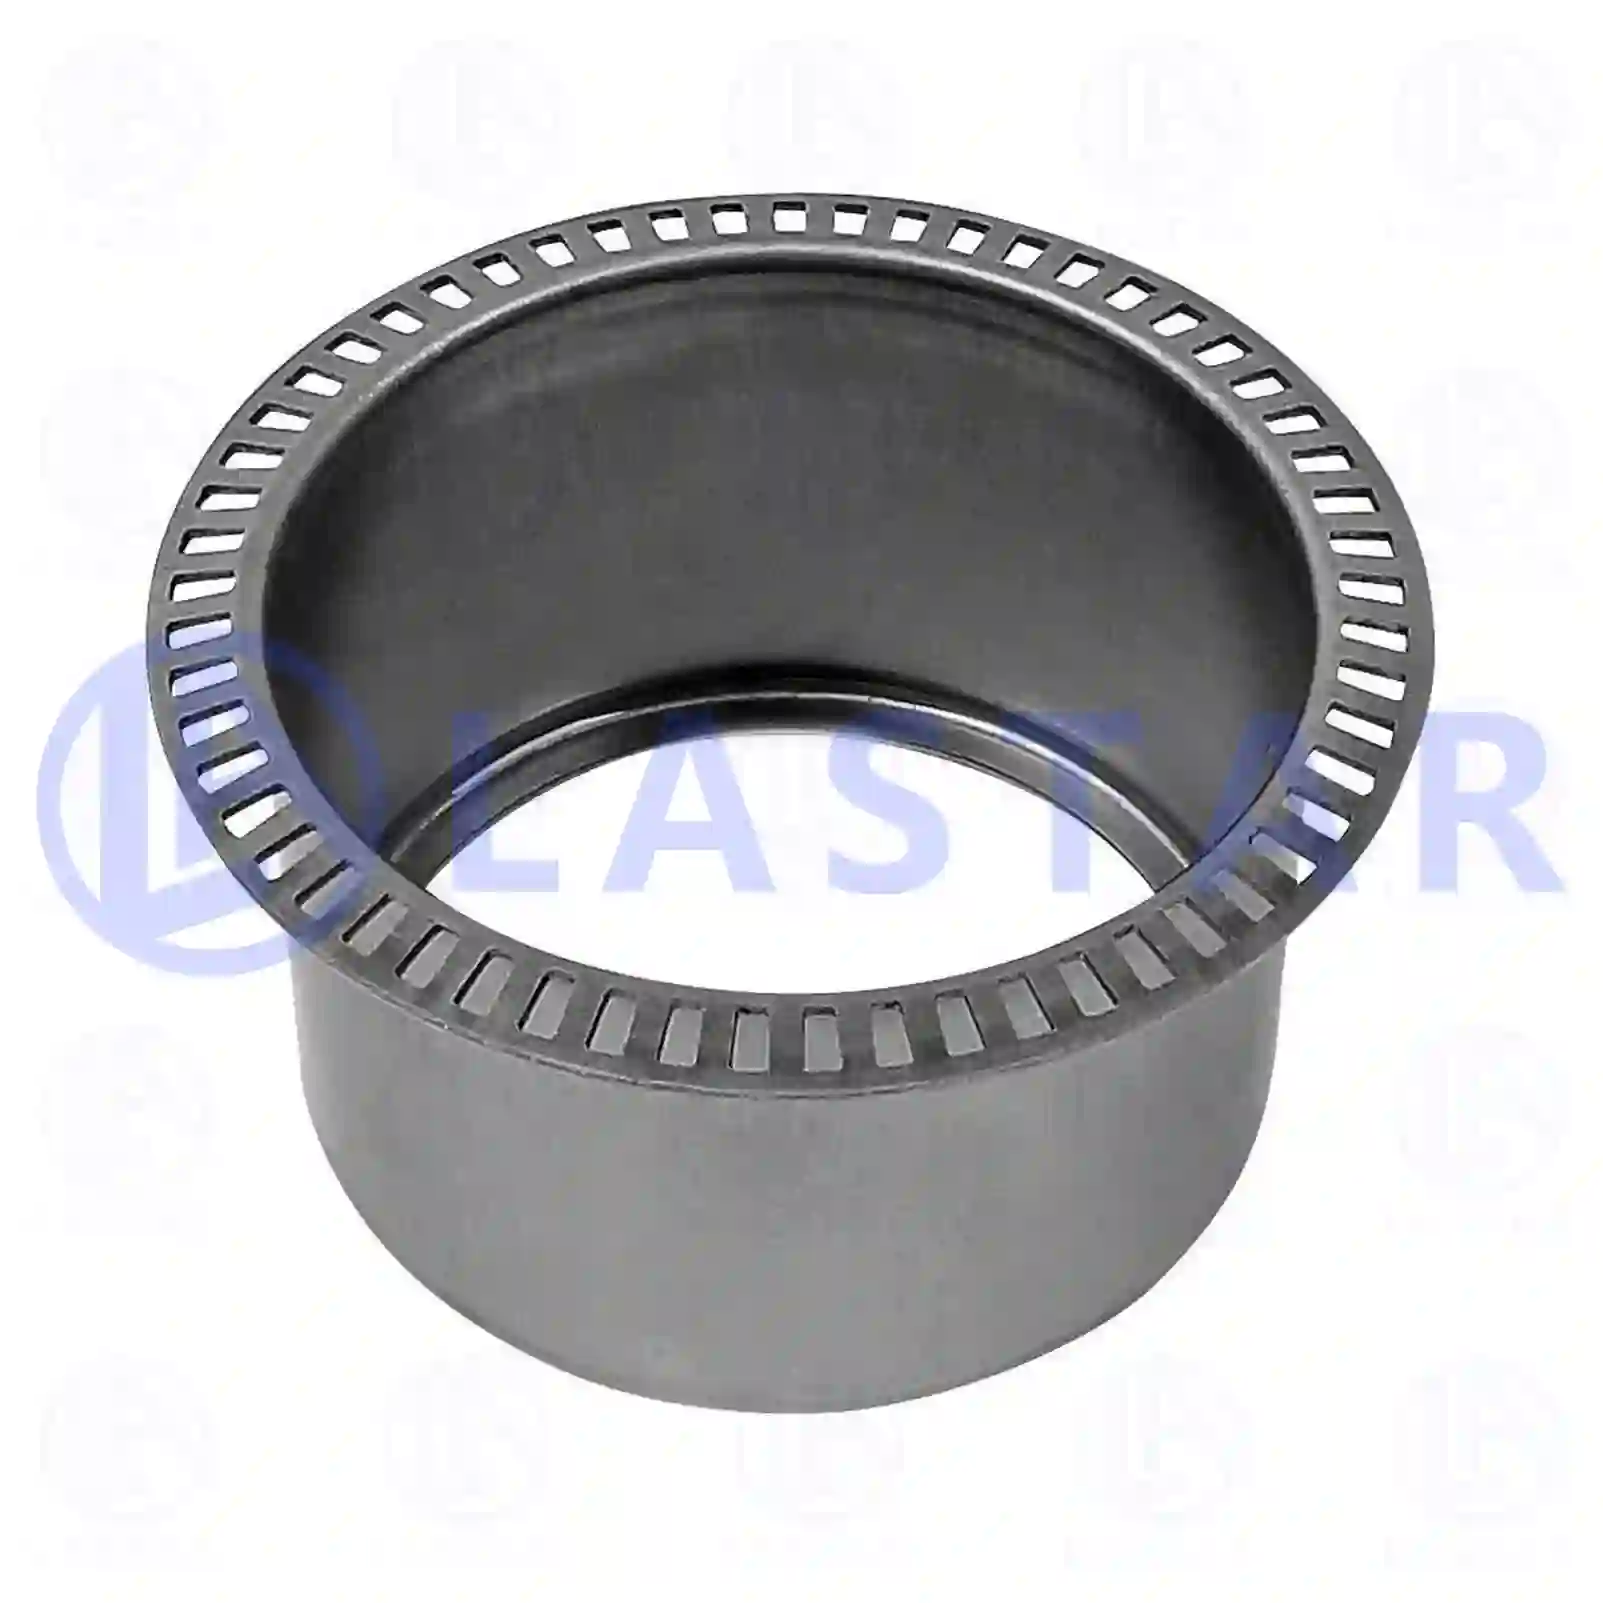 ABS ring, 77726353, 6683560515, ZG50014-0008, , , ||  77726353 Lastar Spare Part | Truck Spare Parts, Auotomotive Spare Parts ABS ring, 77726353, 6683560515, ZG50014-0008, , , ||  77726353 Lastar Spare Part | Truck Spare Parts, Auotomotive Spare Parts